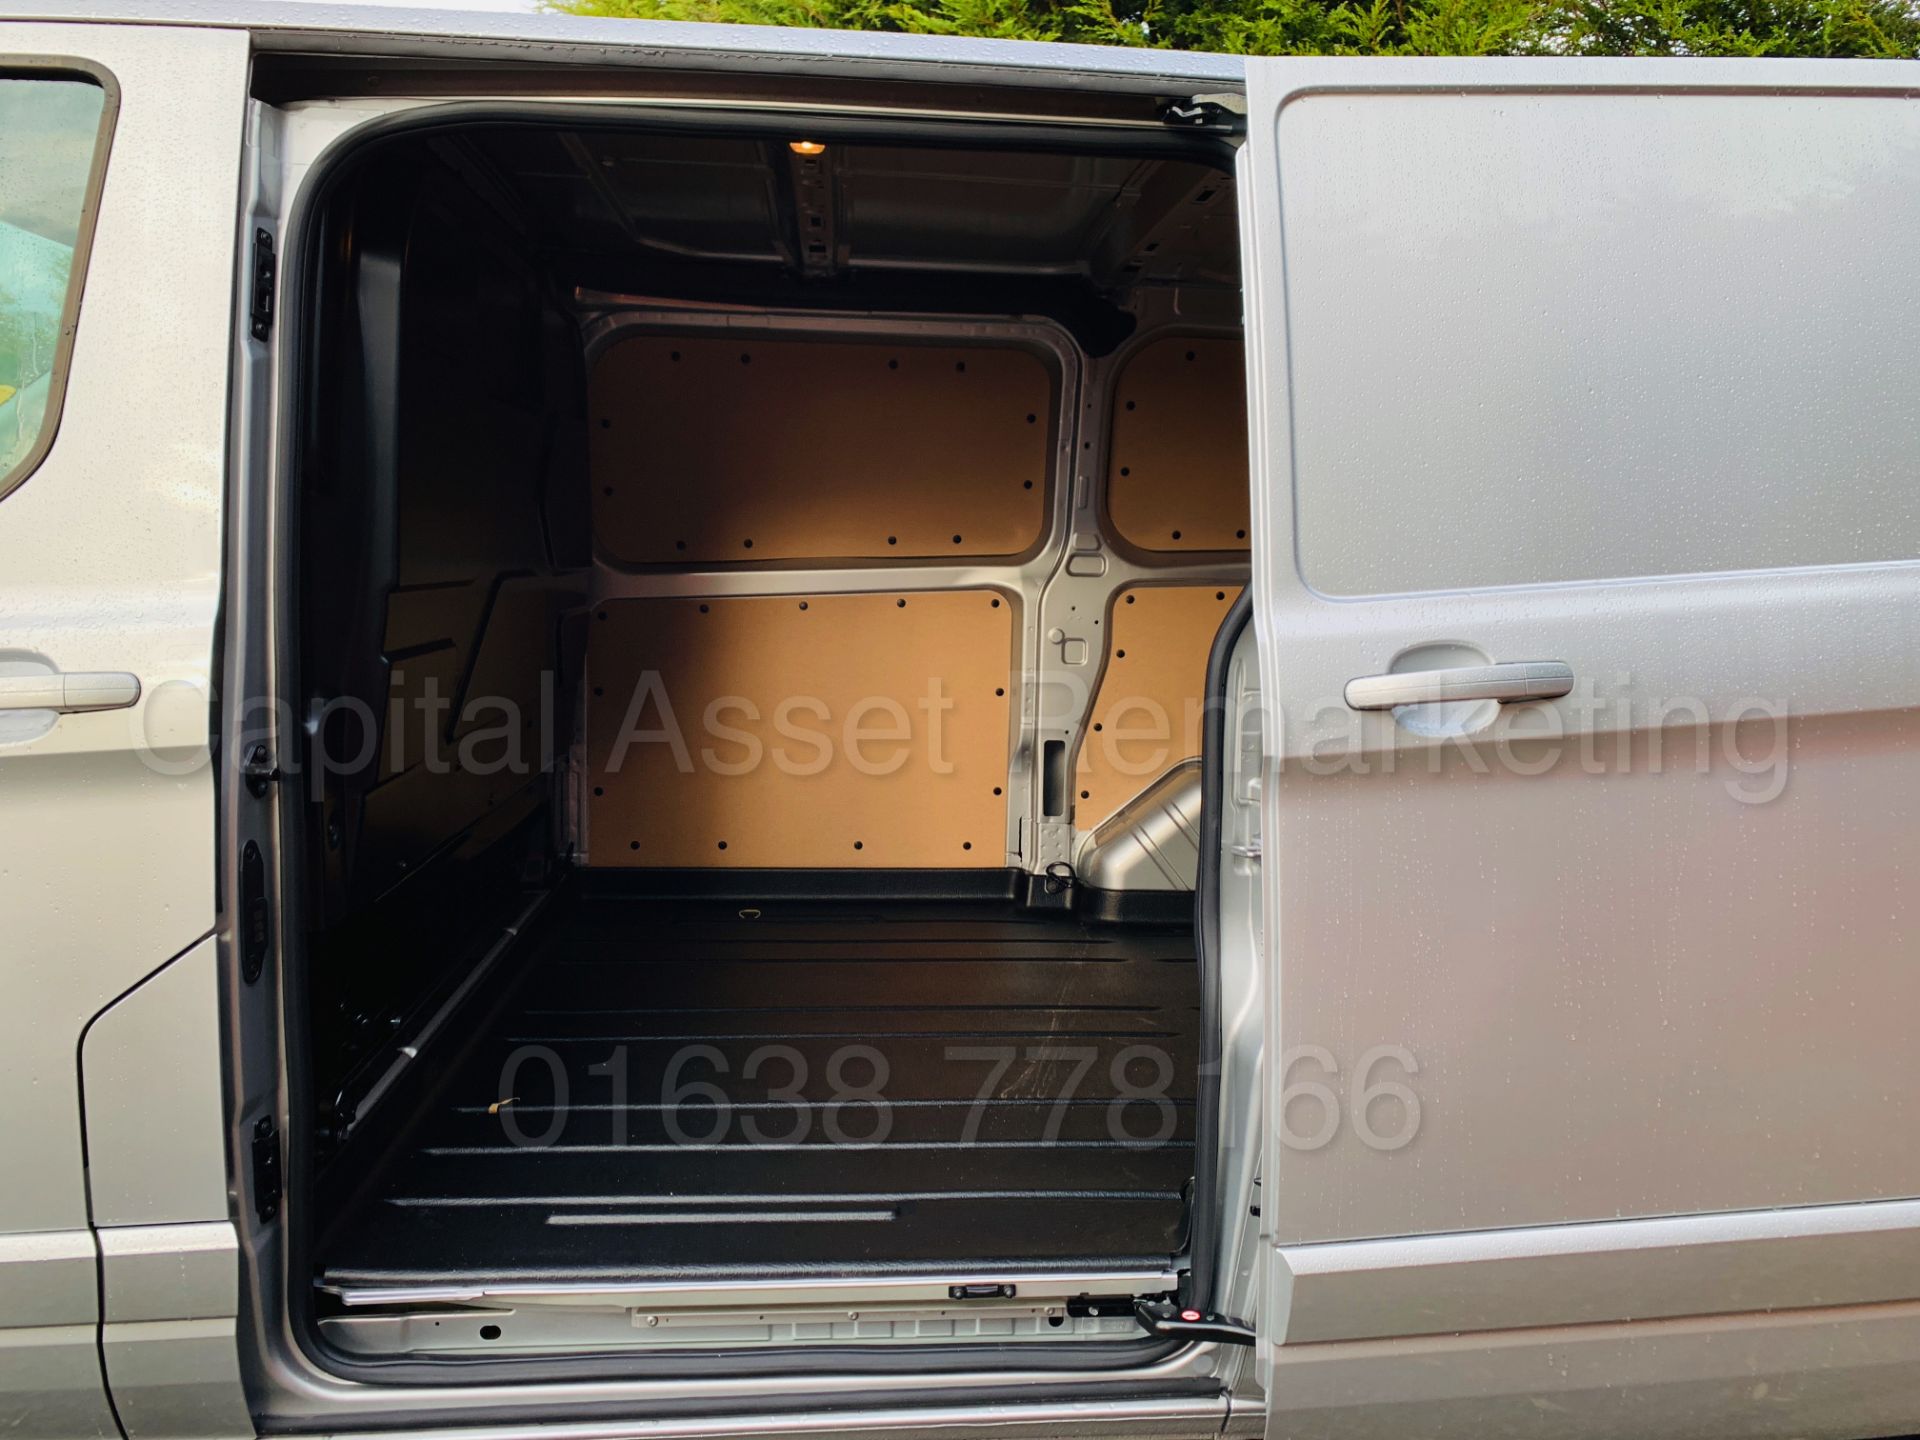 FORD TRANSIT CUSTOM *LIMITED EDTION* (2018 - 68 REG) '2.0 TDCI - 130 BHP - 6 SPEED' *ALL NEW MODEL* - Image 31 of 51